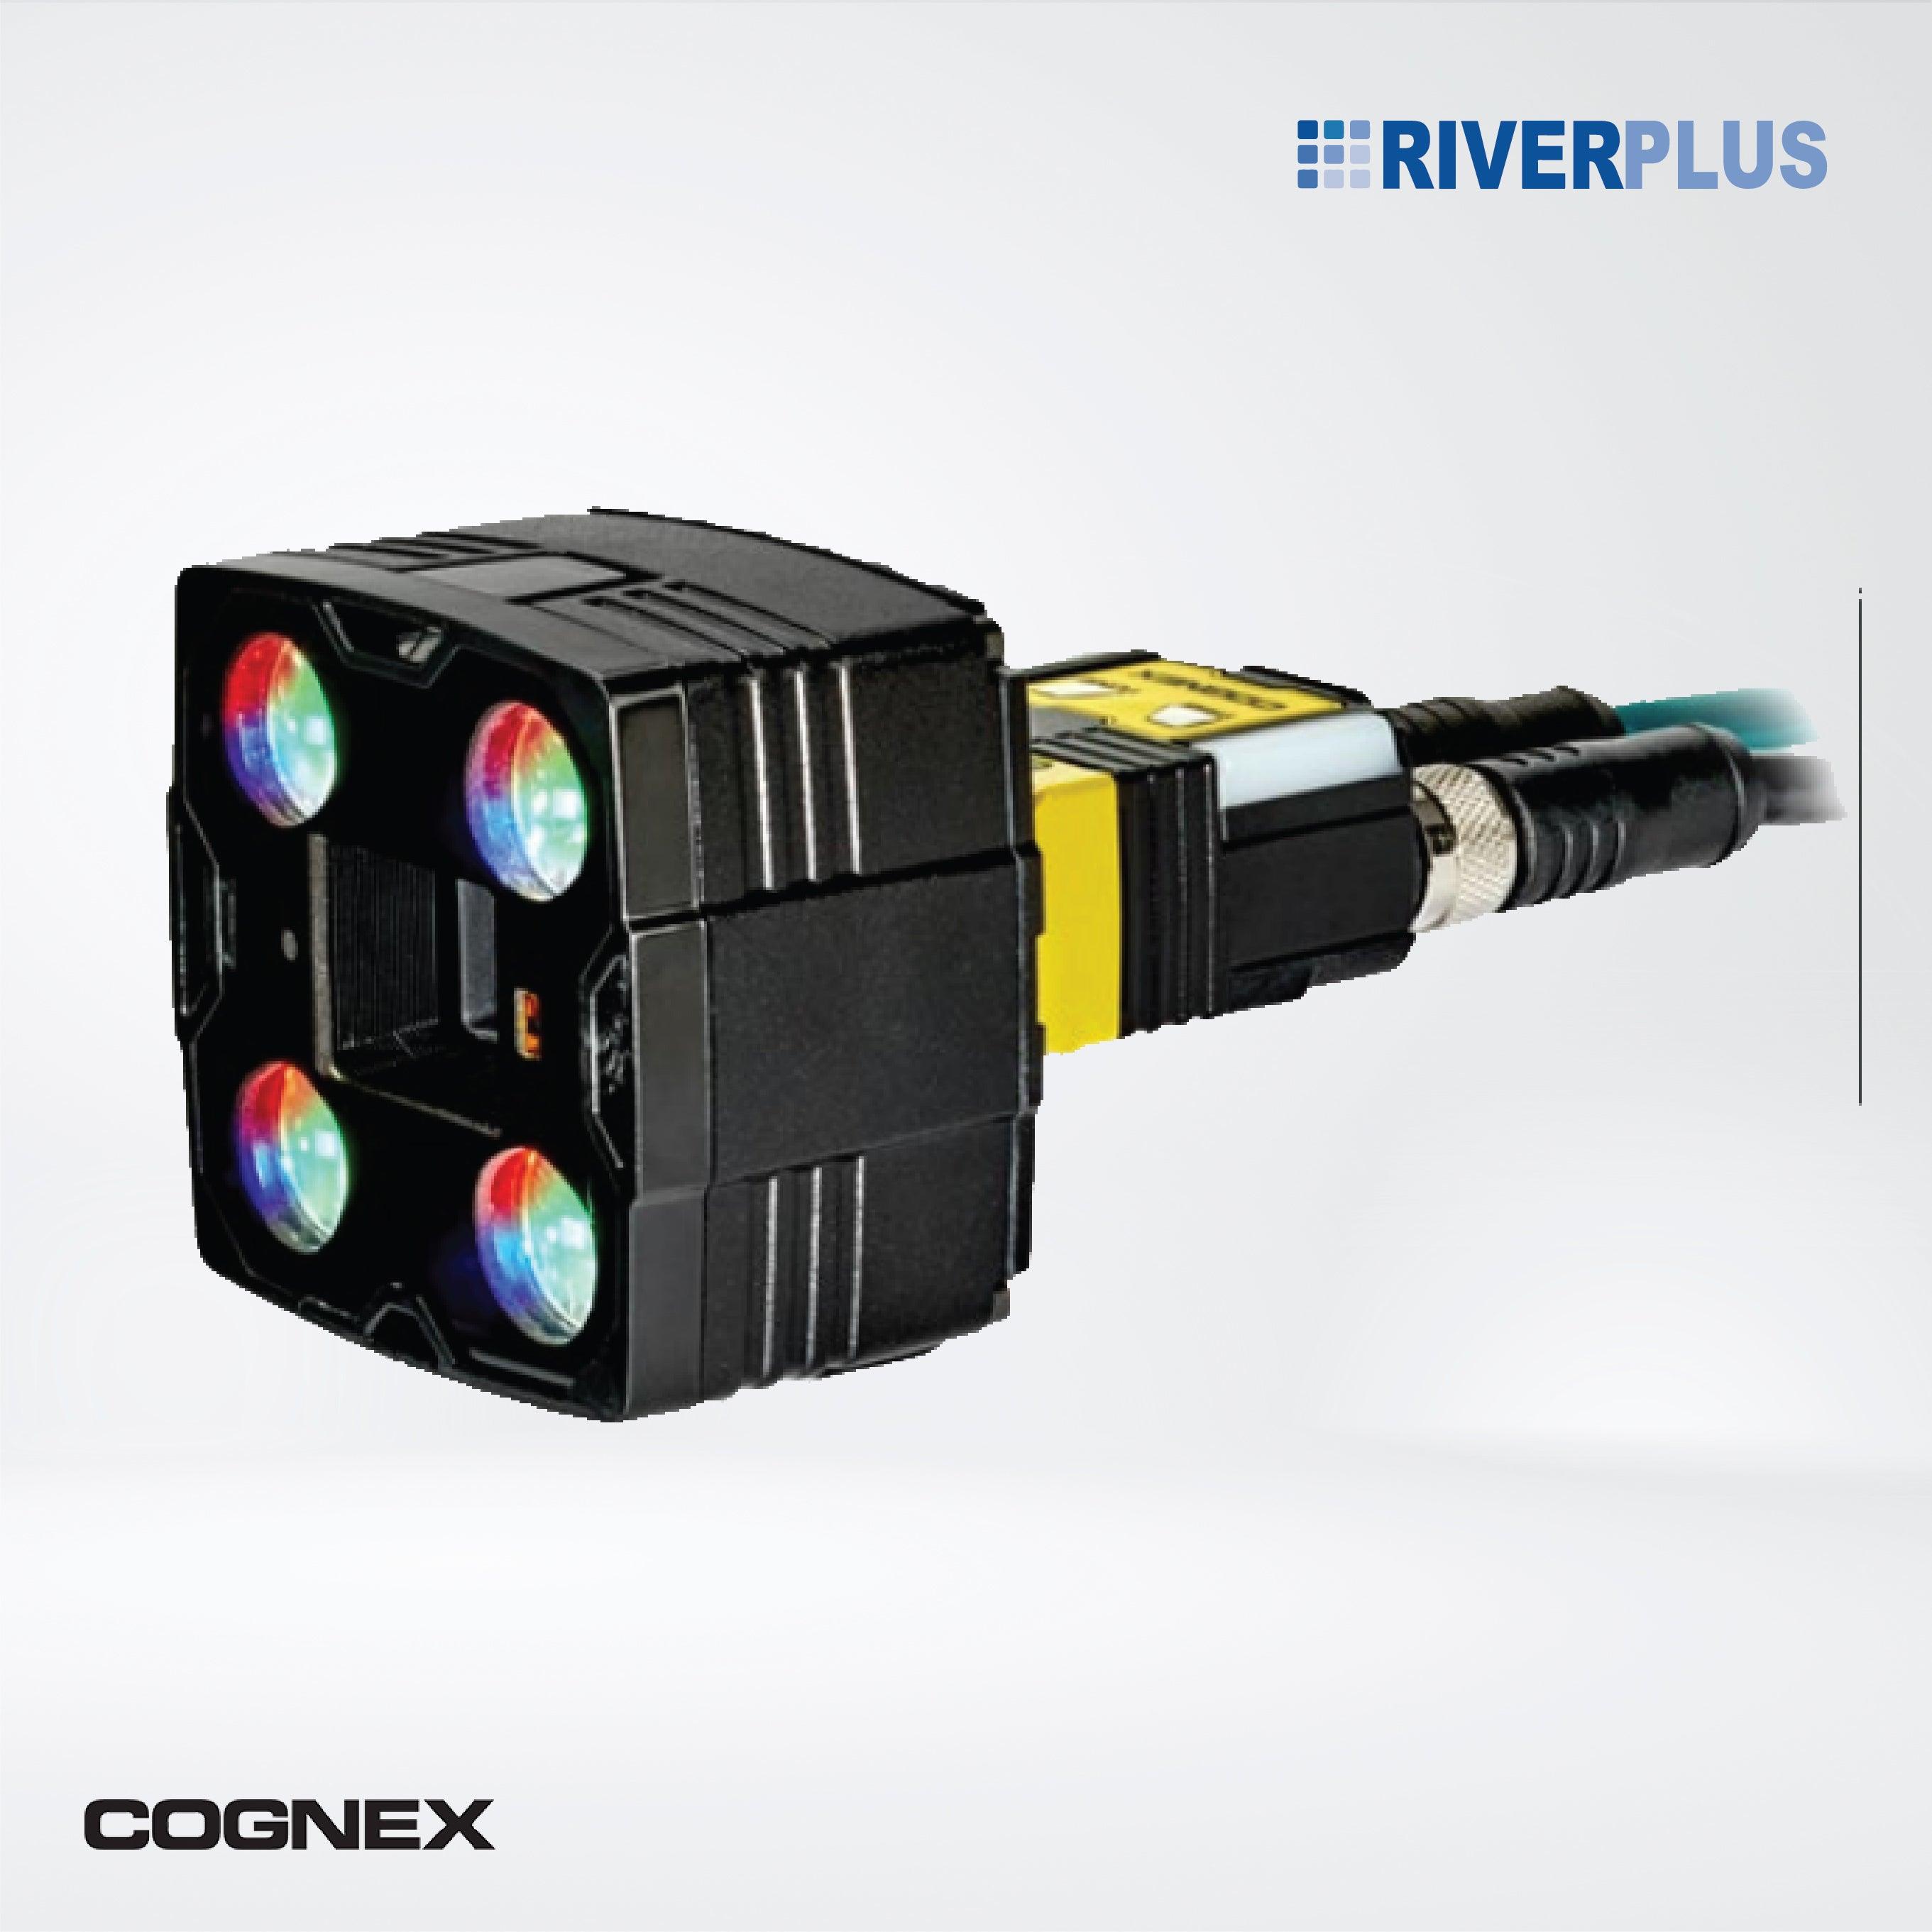 In-Sight 3800 vision system , Setting the pace of machine vision - Riverplus